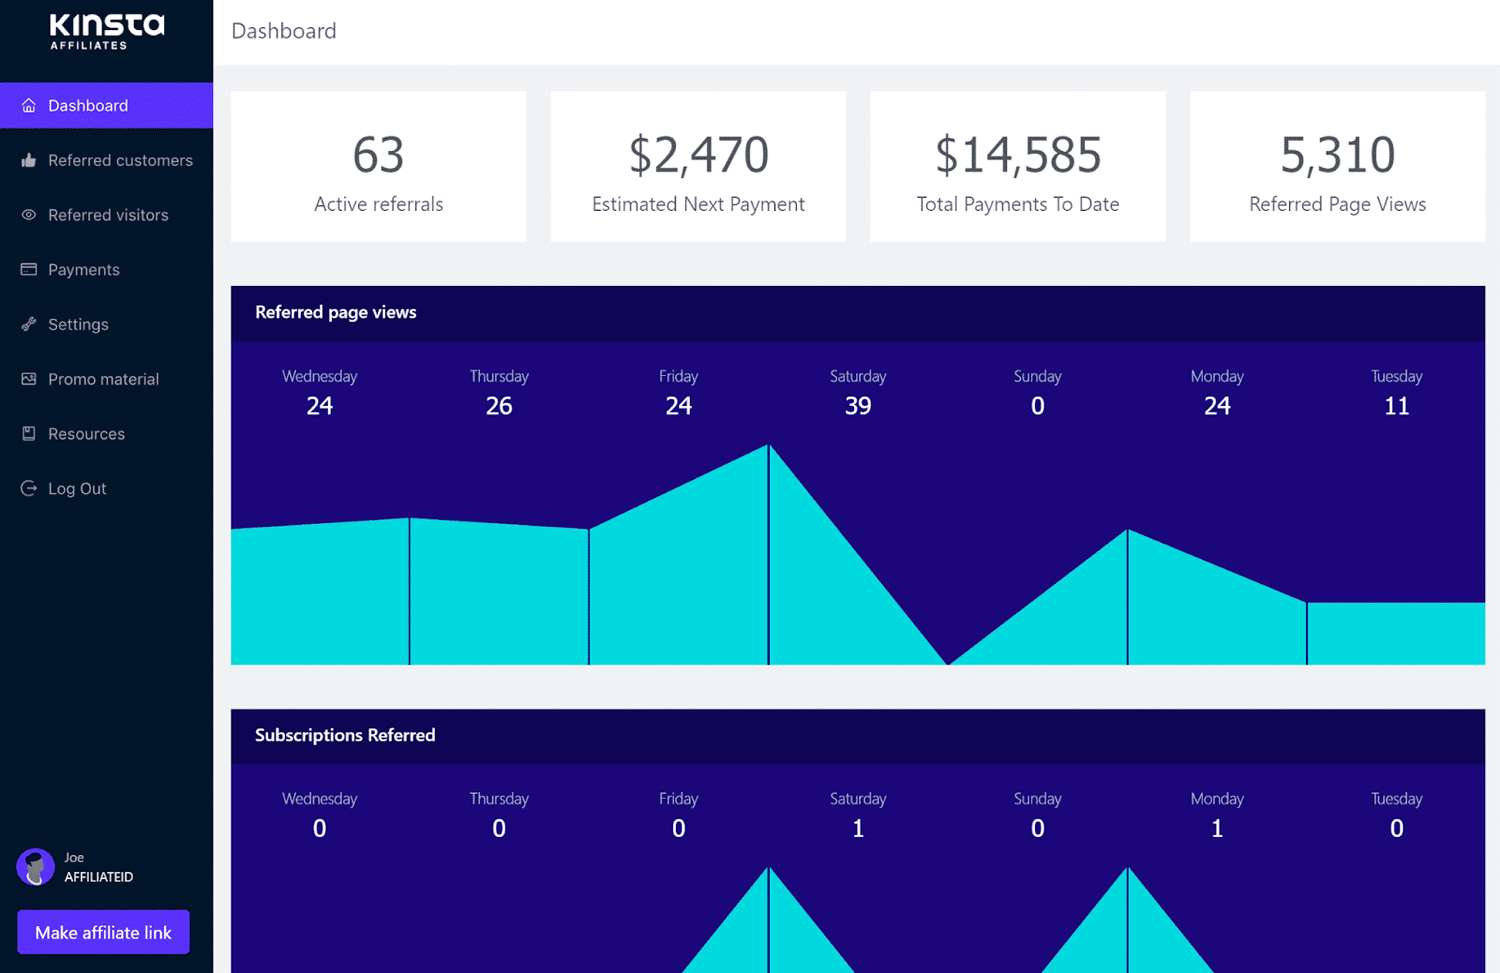 Kinsta's affiliate dashboard shows 63 active referrals, $2,470 estimated next payment, $14,585 total payments to date, and 5,310 pageviews. Below that are graphs of referred page views and subscriptions referred.